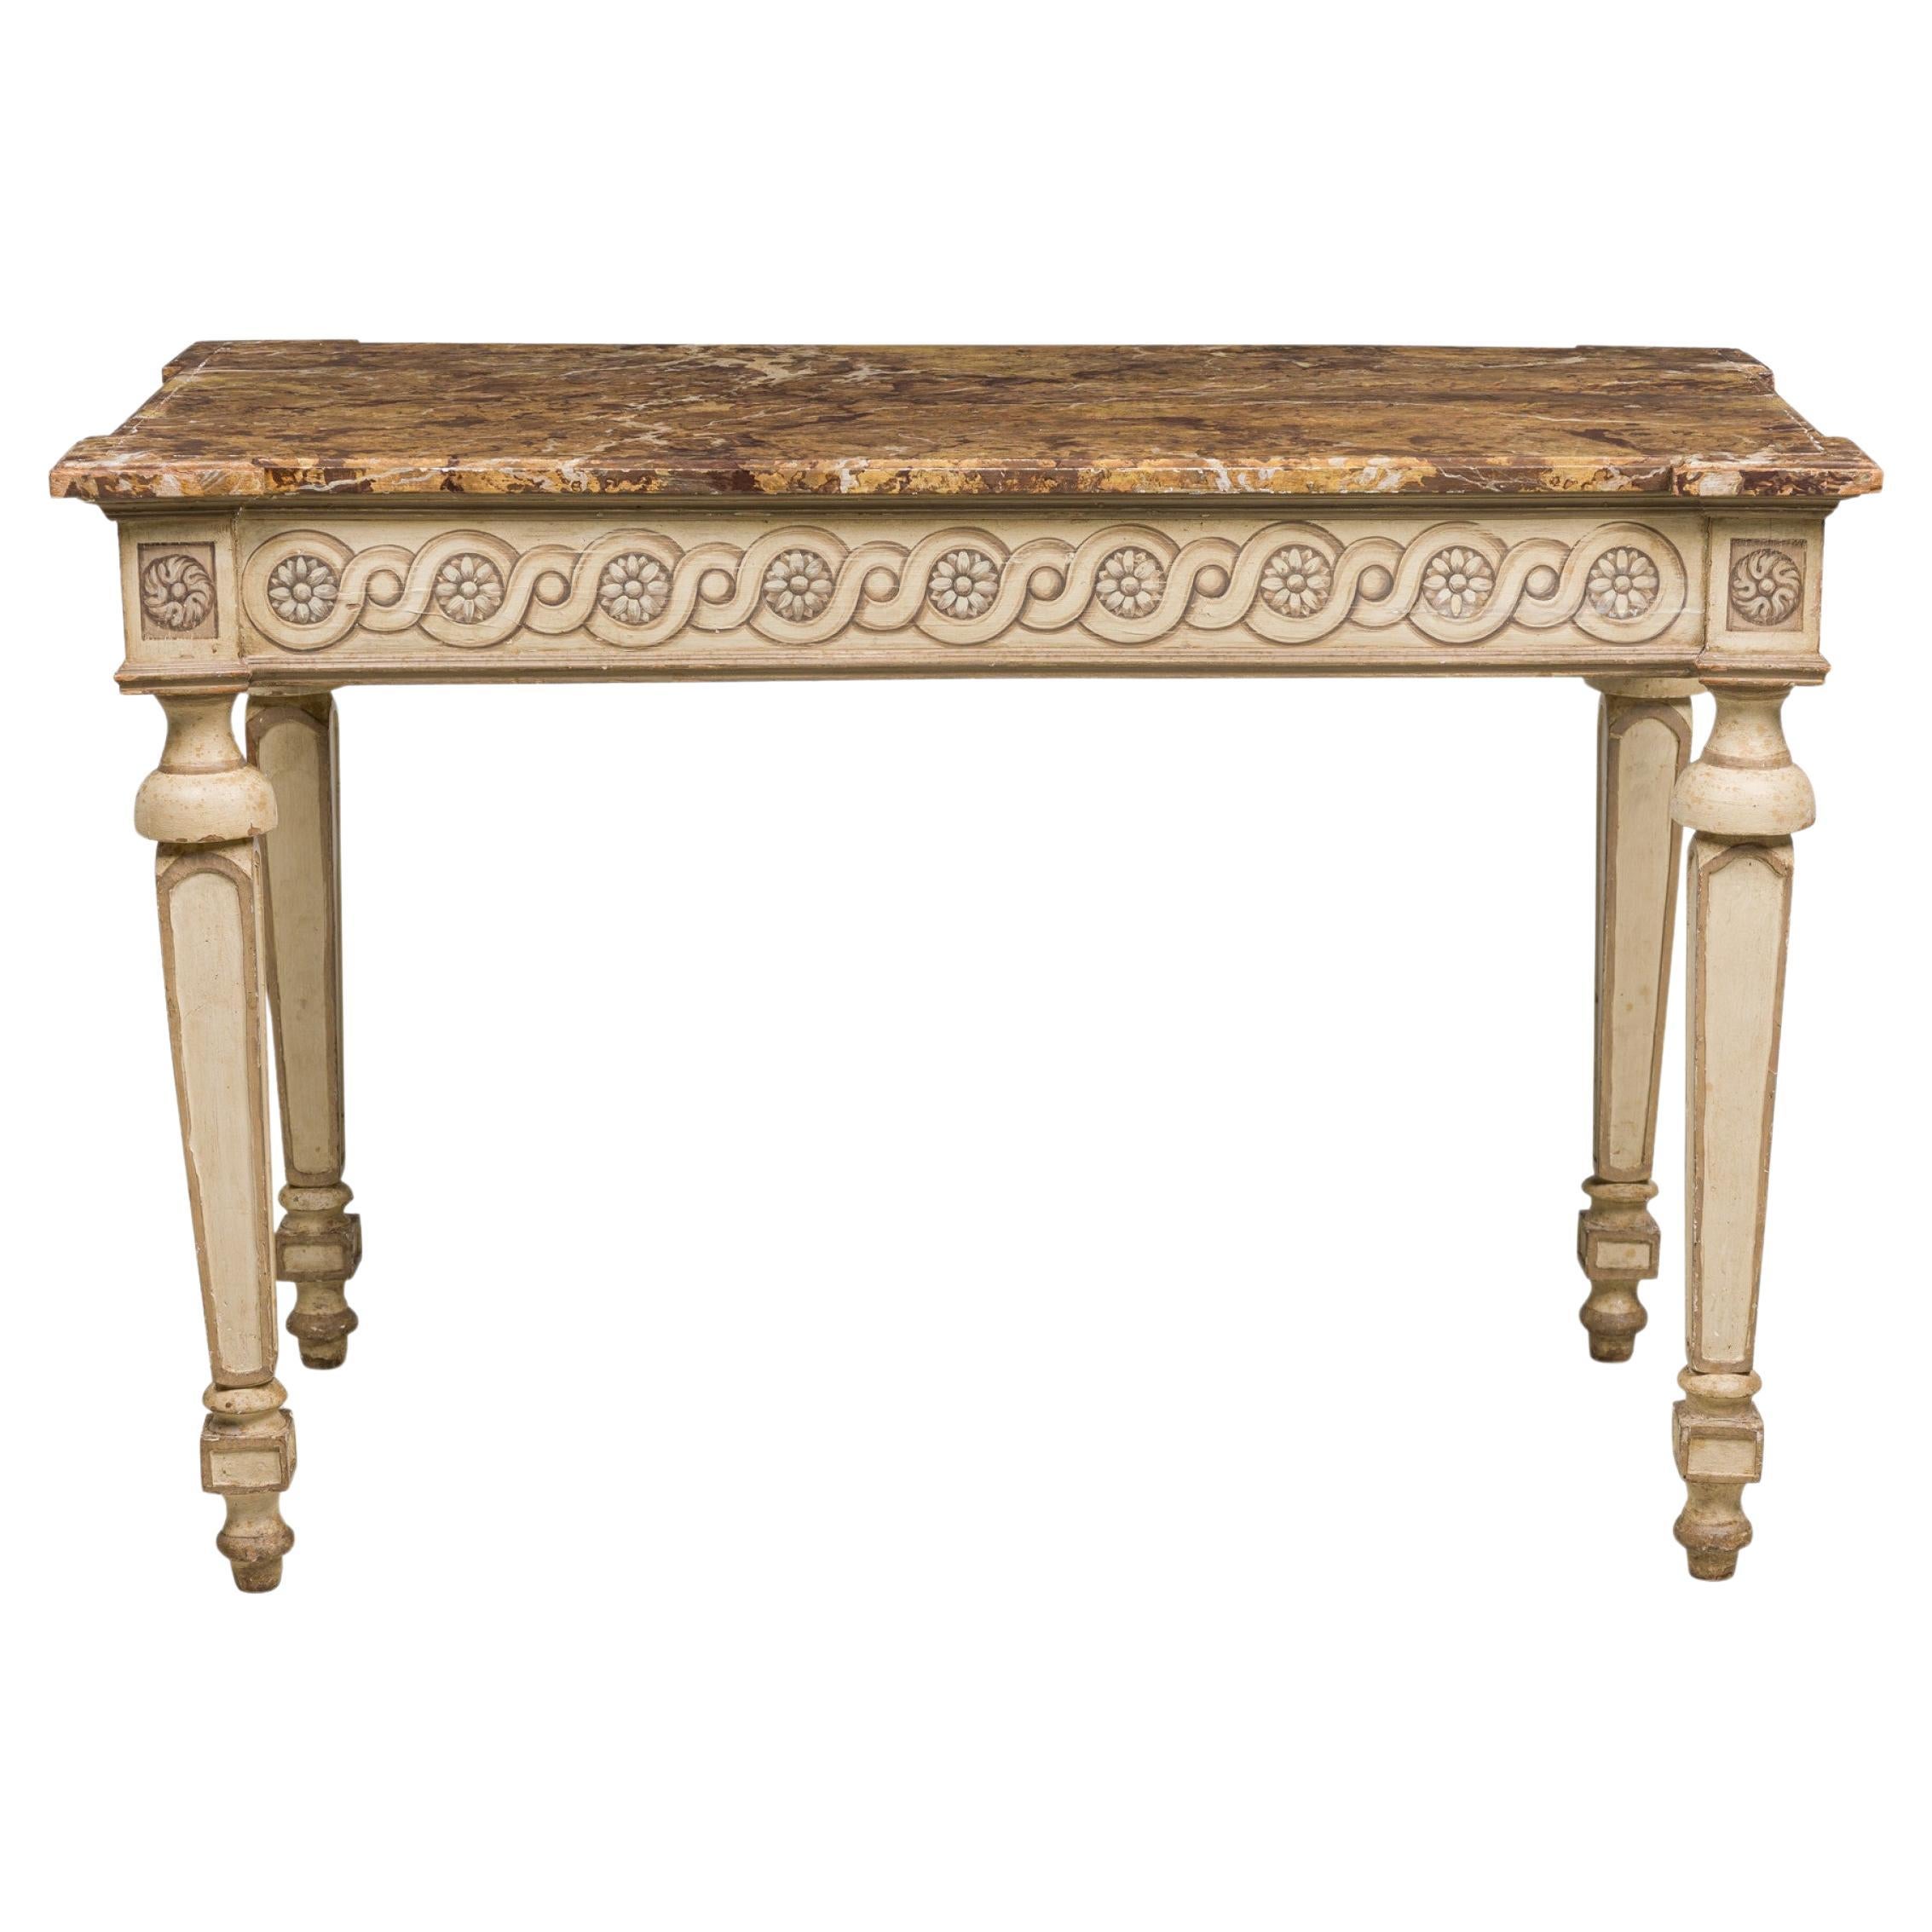 Italian Neoclassic Beige Painted & Parcel-Gilt Console / Center Table For Sale